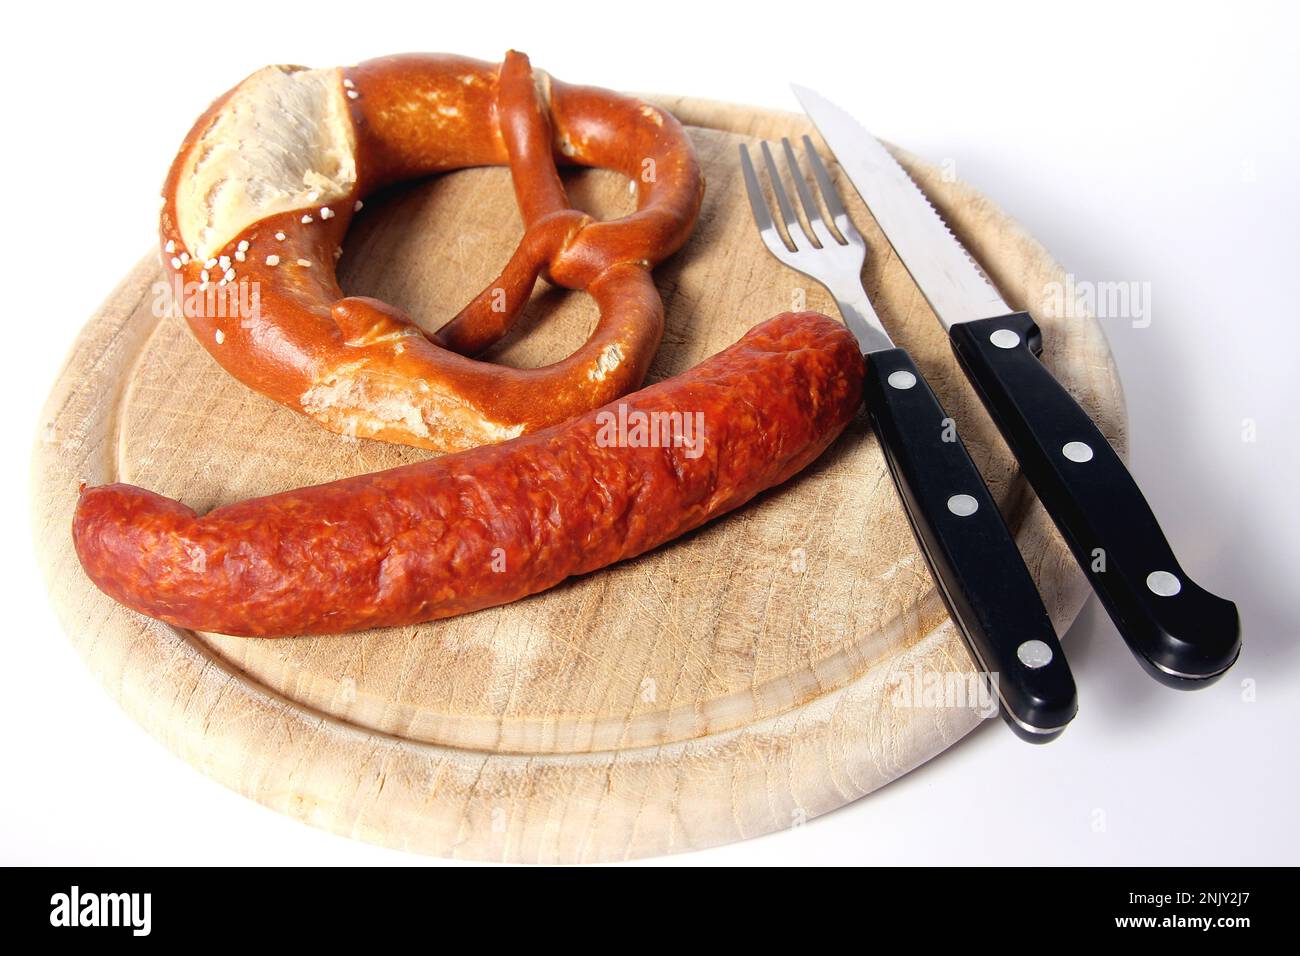 wooden plate with pretzel and mettwurst Stock Photo